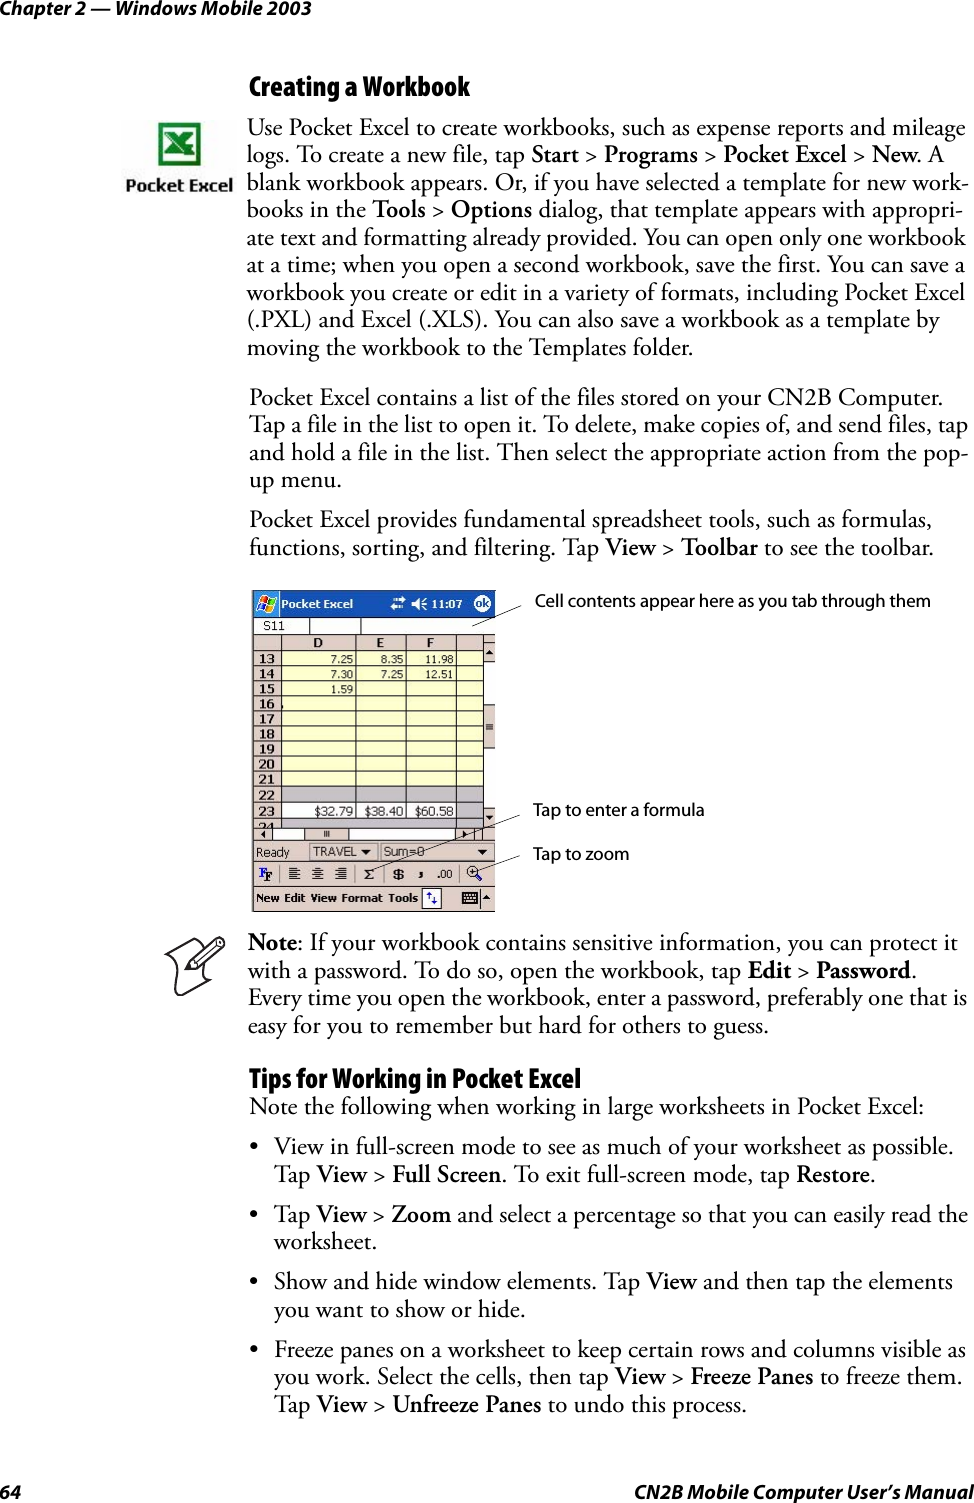 Chapter 2 — Windows Mobile 200364 CN2B Mobile Computer User’s ManualCreating a WorkbookPocket Excel contains a list of the files stored on your CN2B Computer. Tap a file in the list to open it. To delete, make copies of, and send files, tap and hold a file in the list. Then select the appropriate action from the pop-up menu.Pocket Excel provides fundamental spreadsheet tools, such as formulas, functions, sorting, and filtering. Tap View &gt; Toolbar to see the toolbar.Tips for Working in Pocket ExcelNote the following when working in large worksheets in Pocket Excel:• View in full-screen mode to see as much of your worksheet as possible. Tap View &gt; Full Screen. To exit full-screen mode, tap Restore.•Tap View &gt; Zoom and select a percentage so that you can easily read the worksheet.• Show and hide window elements. Tap View and then tap the elements you want to show or hide.• Freeze panes on a worksheet to keep certain rows and columns visible as you work. Select the cells, then tap View &gt; Freeze Panes to freeze them. Tap View &gt; Unfreeze Panes to undo this process.Use Pocket Excel to create workbooks, such as expense reports and mileage logs. To create a new file, tap Start &gt; Programs &gt; Pocket Excel &gt; New. A blank workbook appears. Or, if you have selected a template for new work-books in the To o l s  &gt; Options dialog, that template appears with appropri-ate text and formatting already provided. You can open only one workbook at a time; when you open a second workbook, save the first. You can save a workbook you create or edit in a variety of formats, including Pocket Excel (.PXL) and Excel (.XLS). You can also save a workbook as a template by moving the workbook to the Templates folder.Note: If your workbook contains sensitive information, you can protect it with a password. To do so, open the workbook, tap Edit &gt; Password. Every time you open the workbook, enter a password, preferably one that is easy for you to remember but hard for others to guess.Cell contents appear here as you tab through themTap to zoomTap to enter a formula